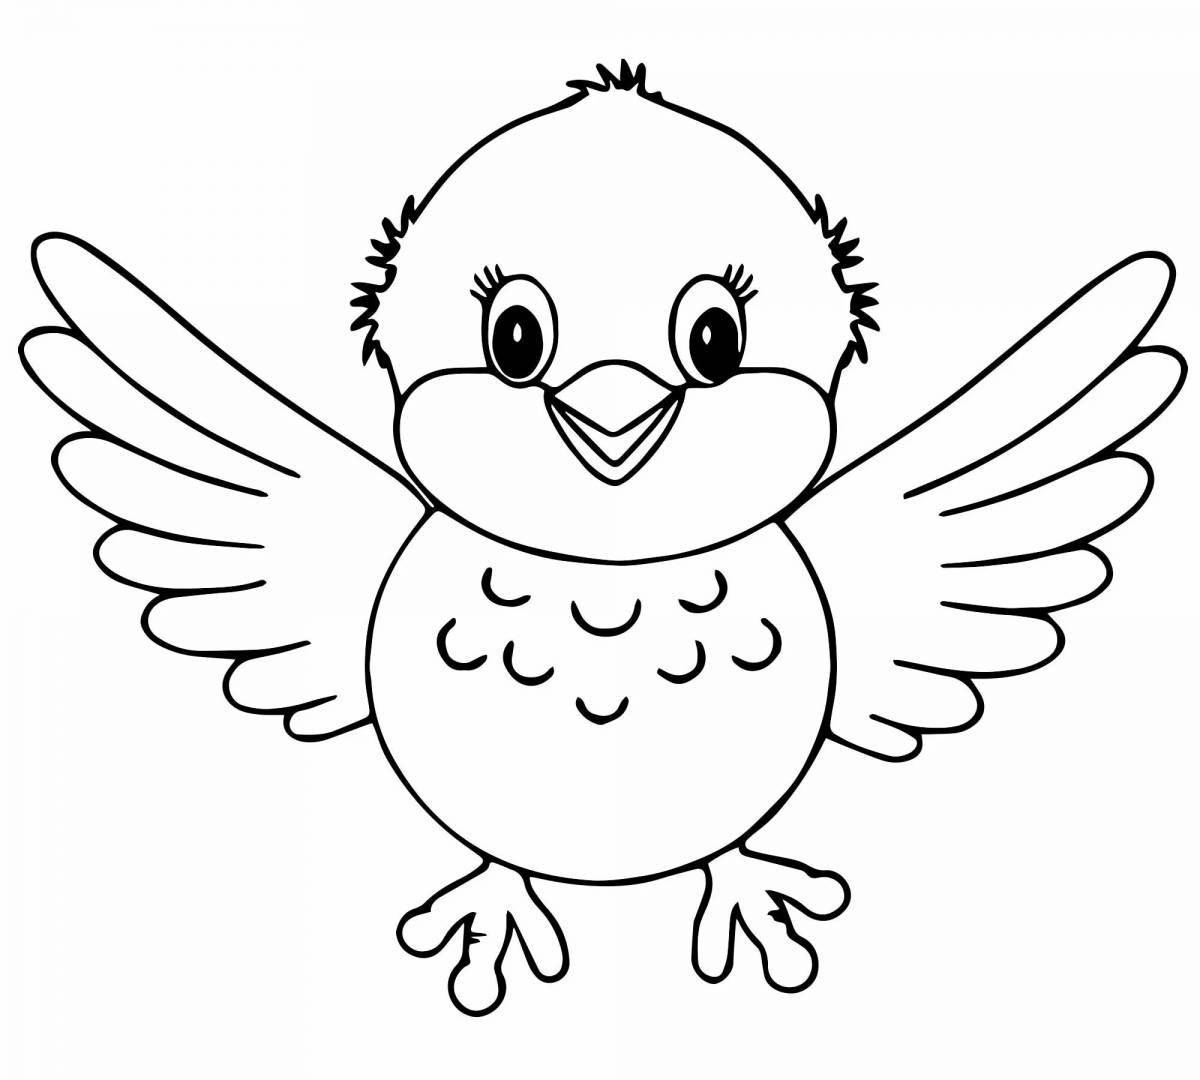 Cute bird coloring book for kids